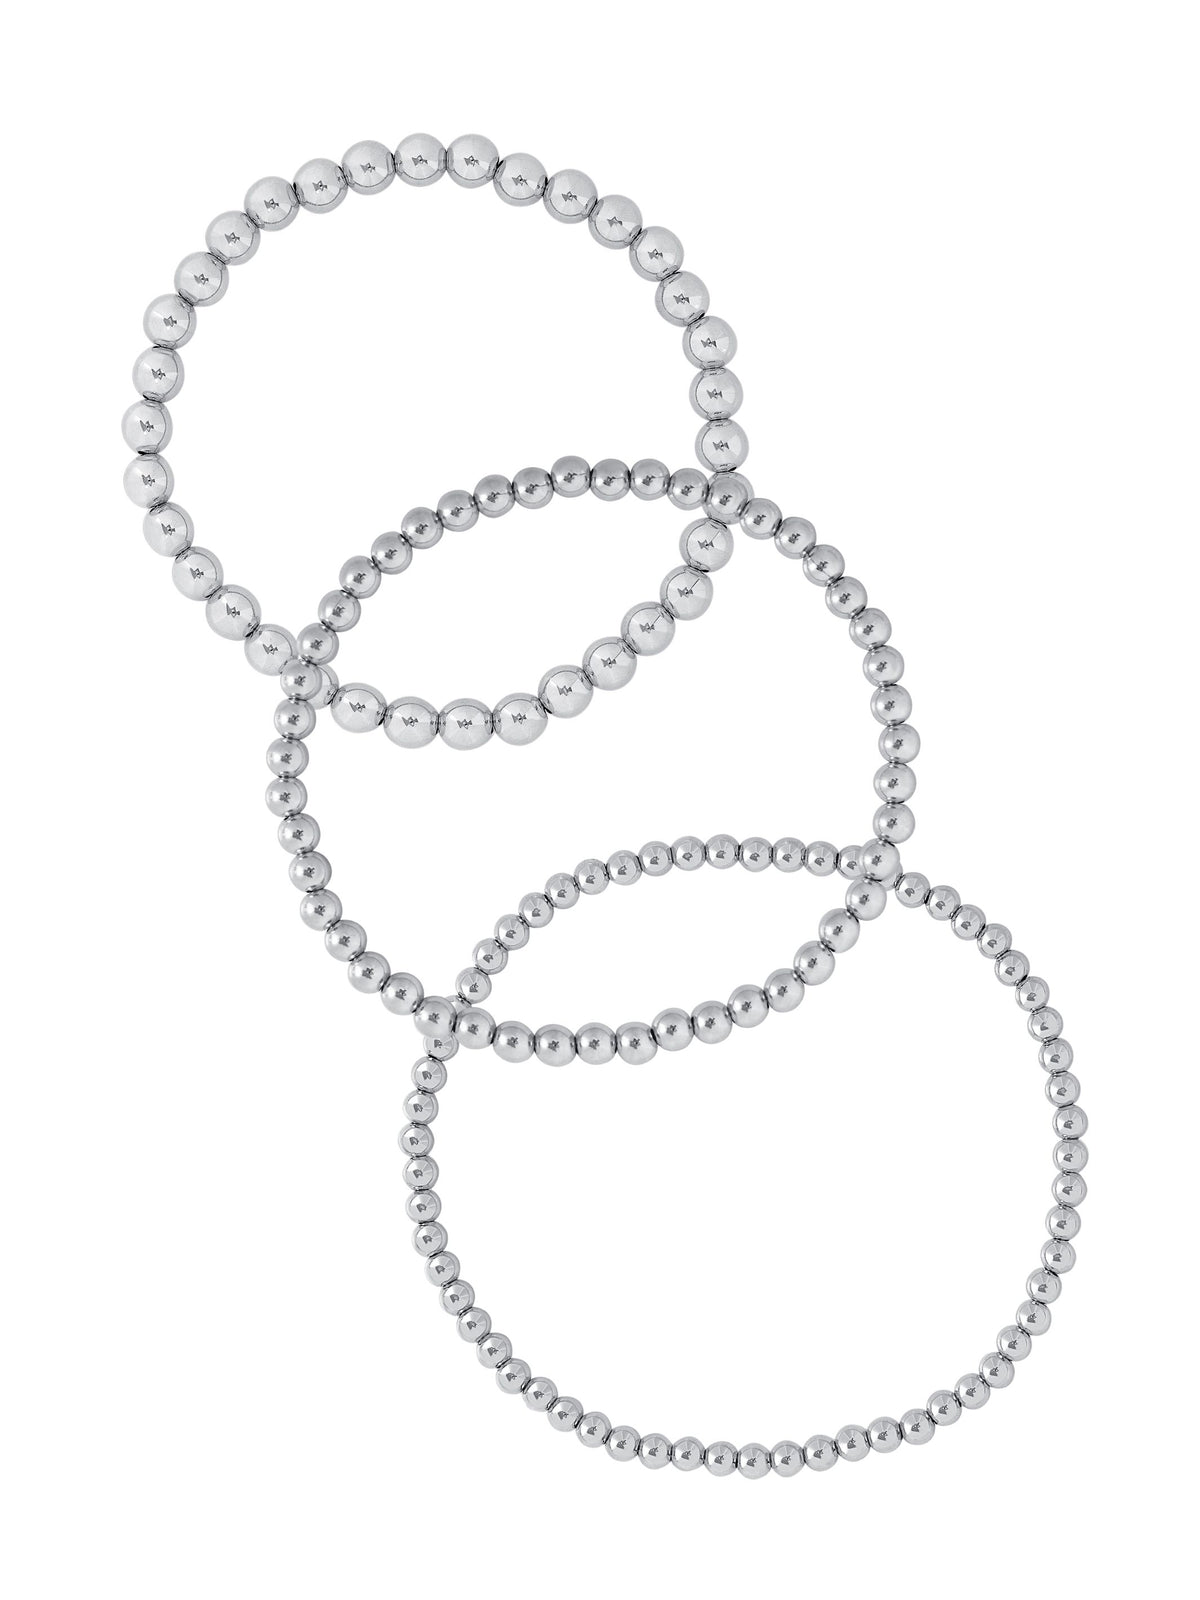 Silver stretch bracelet set 3mm, 4mm and 5mm on white background